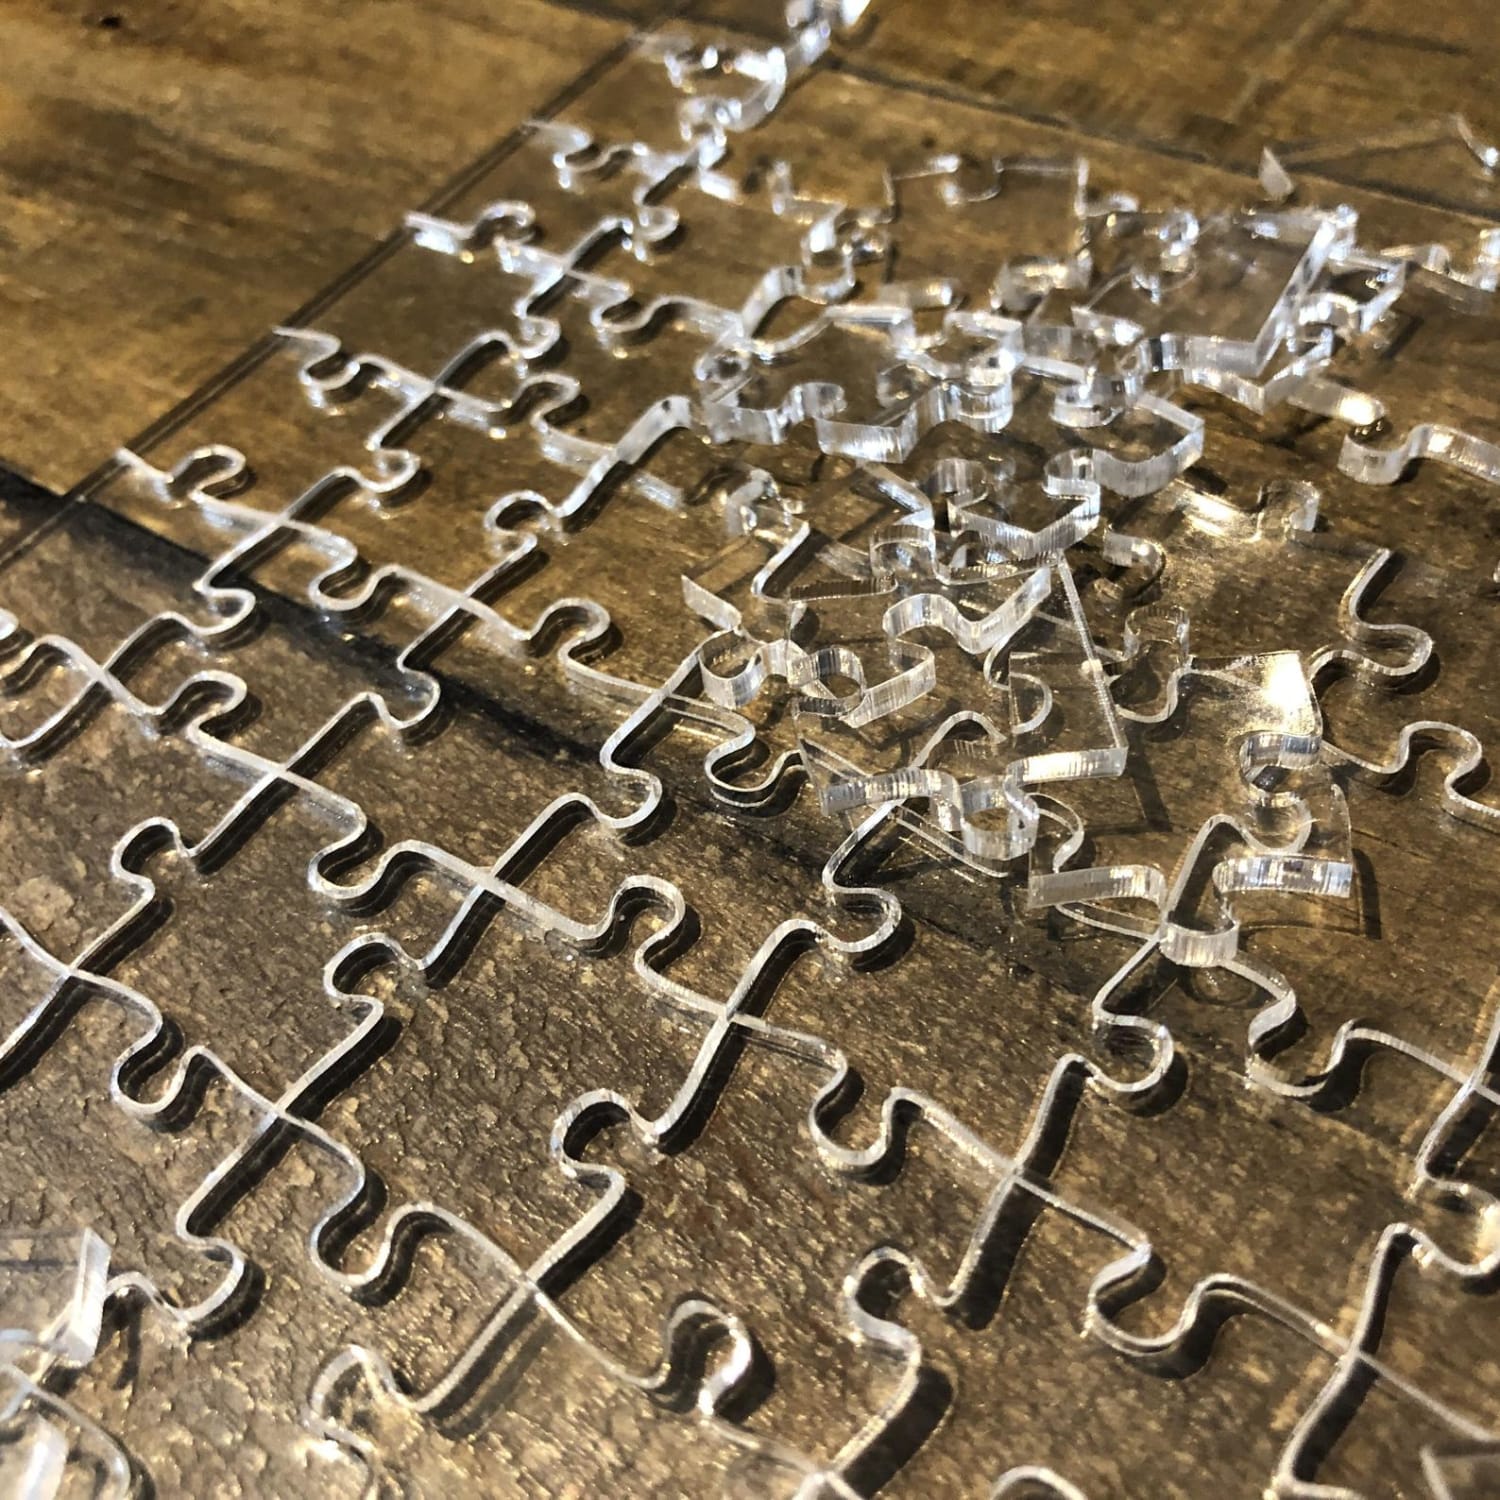 8 clear puzzles you need for the perfect challenge